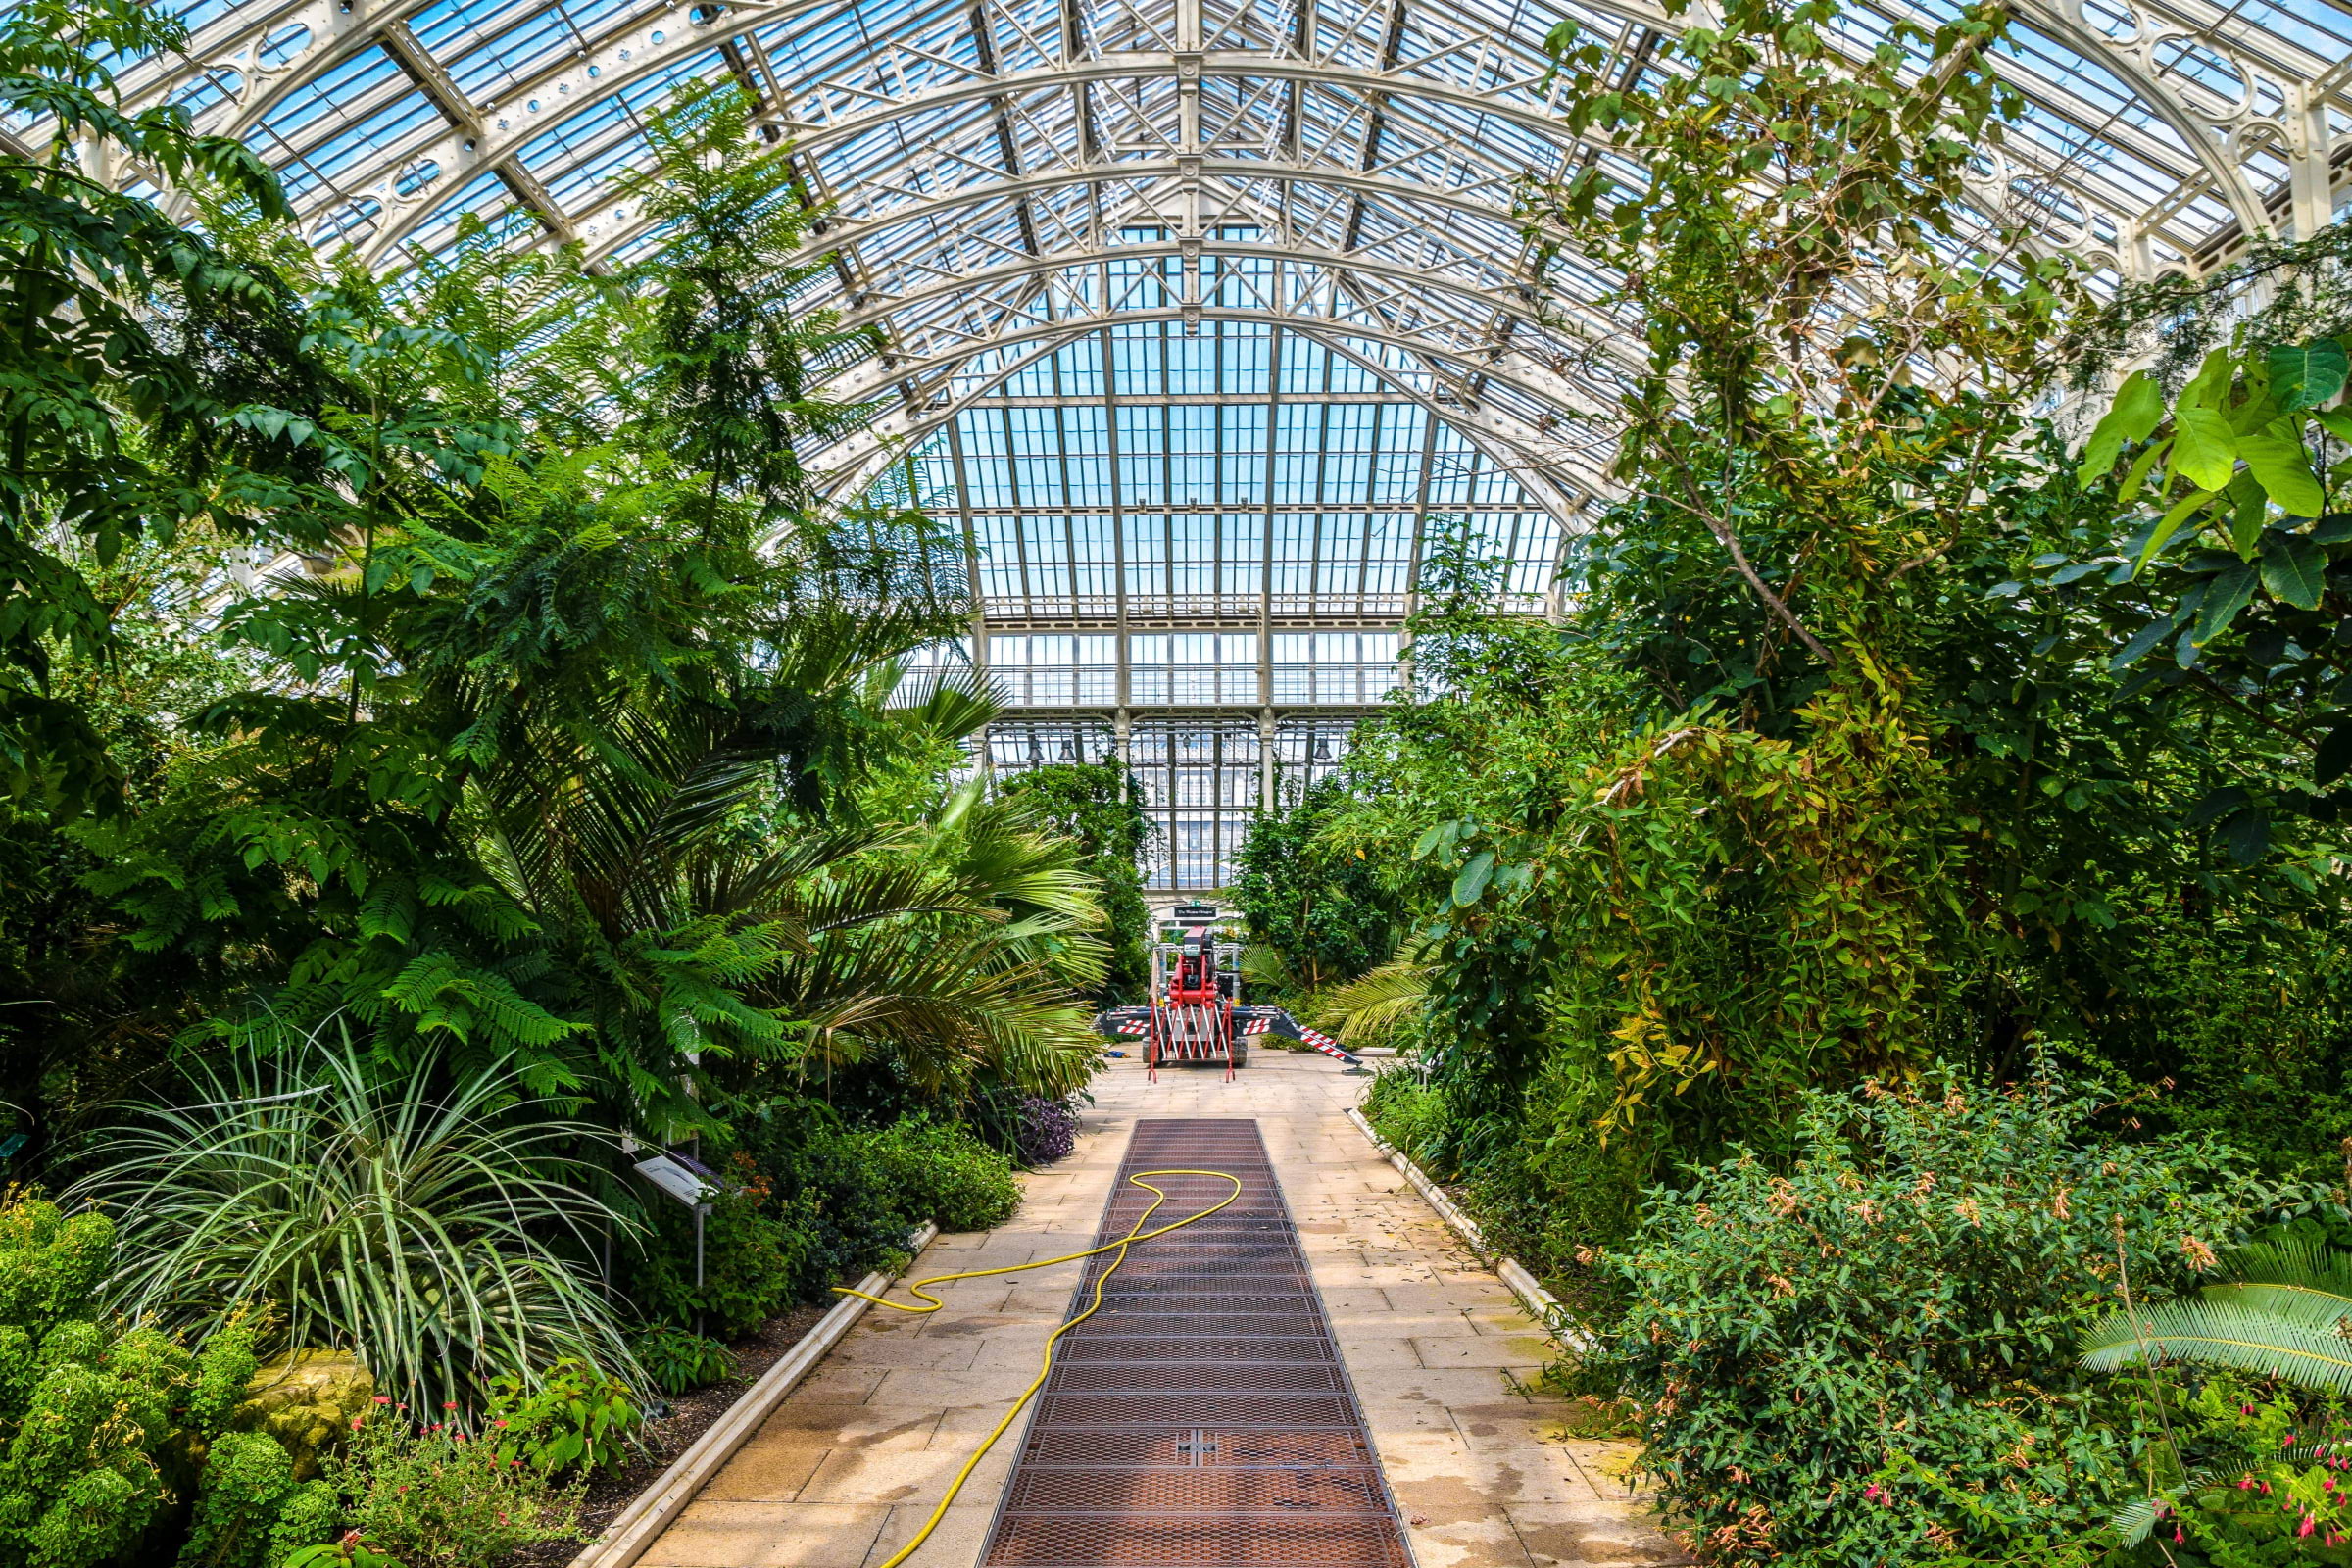 An indoor garden with a path and glass roof